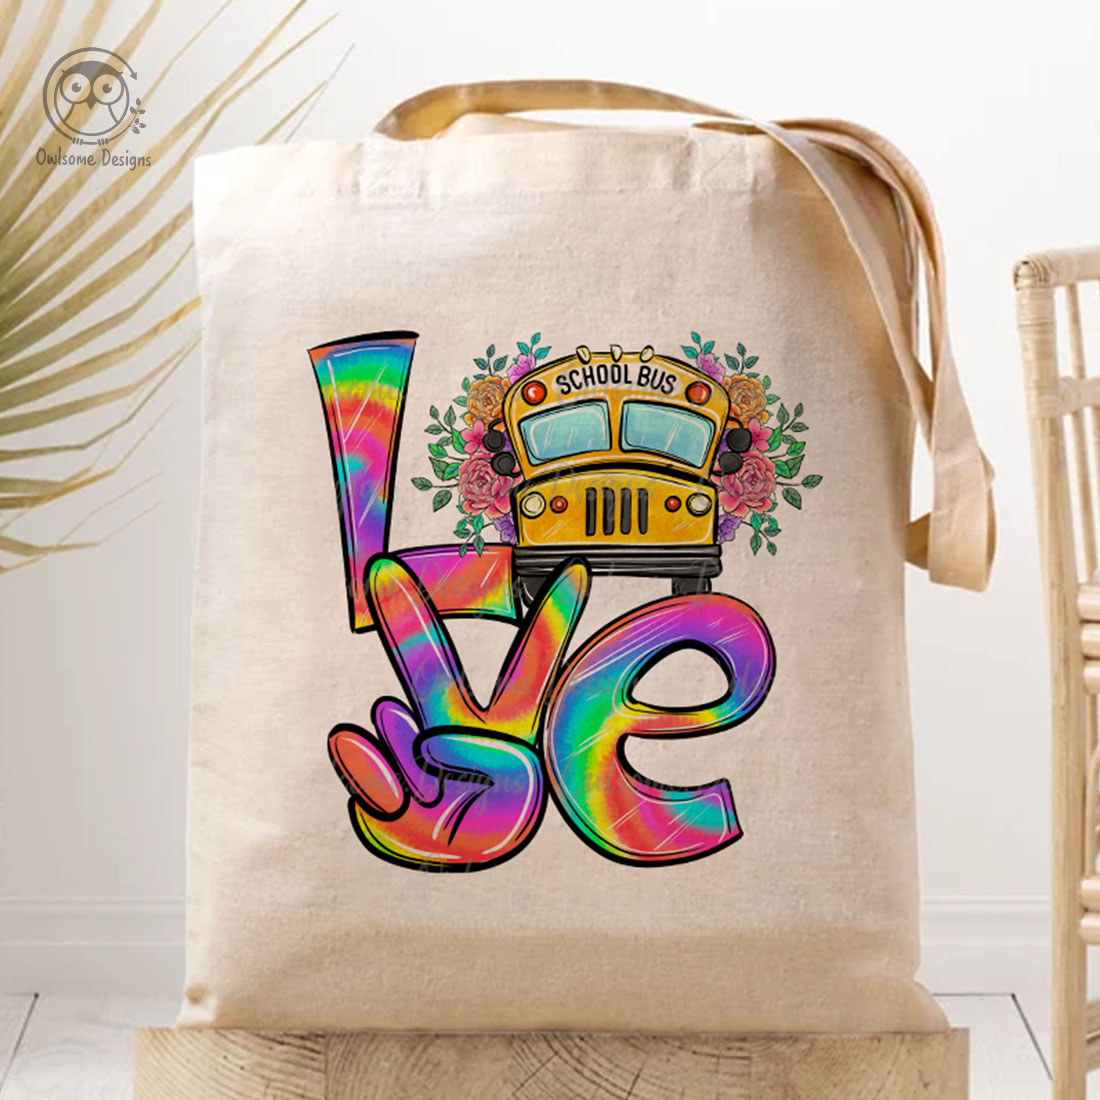 Image of a bag with a charming inscription love with a bus.